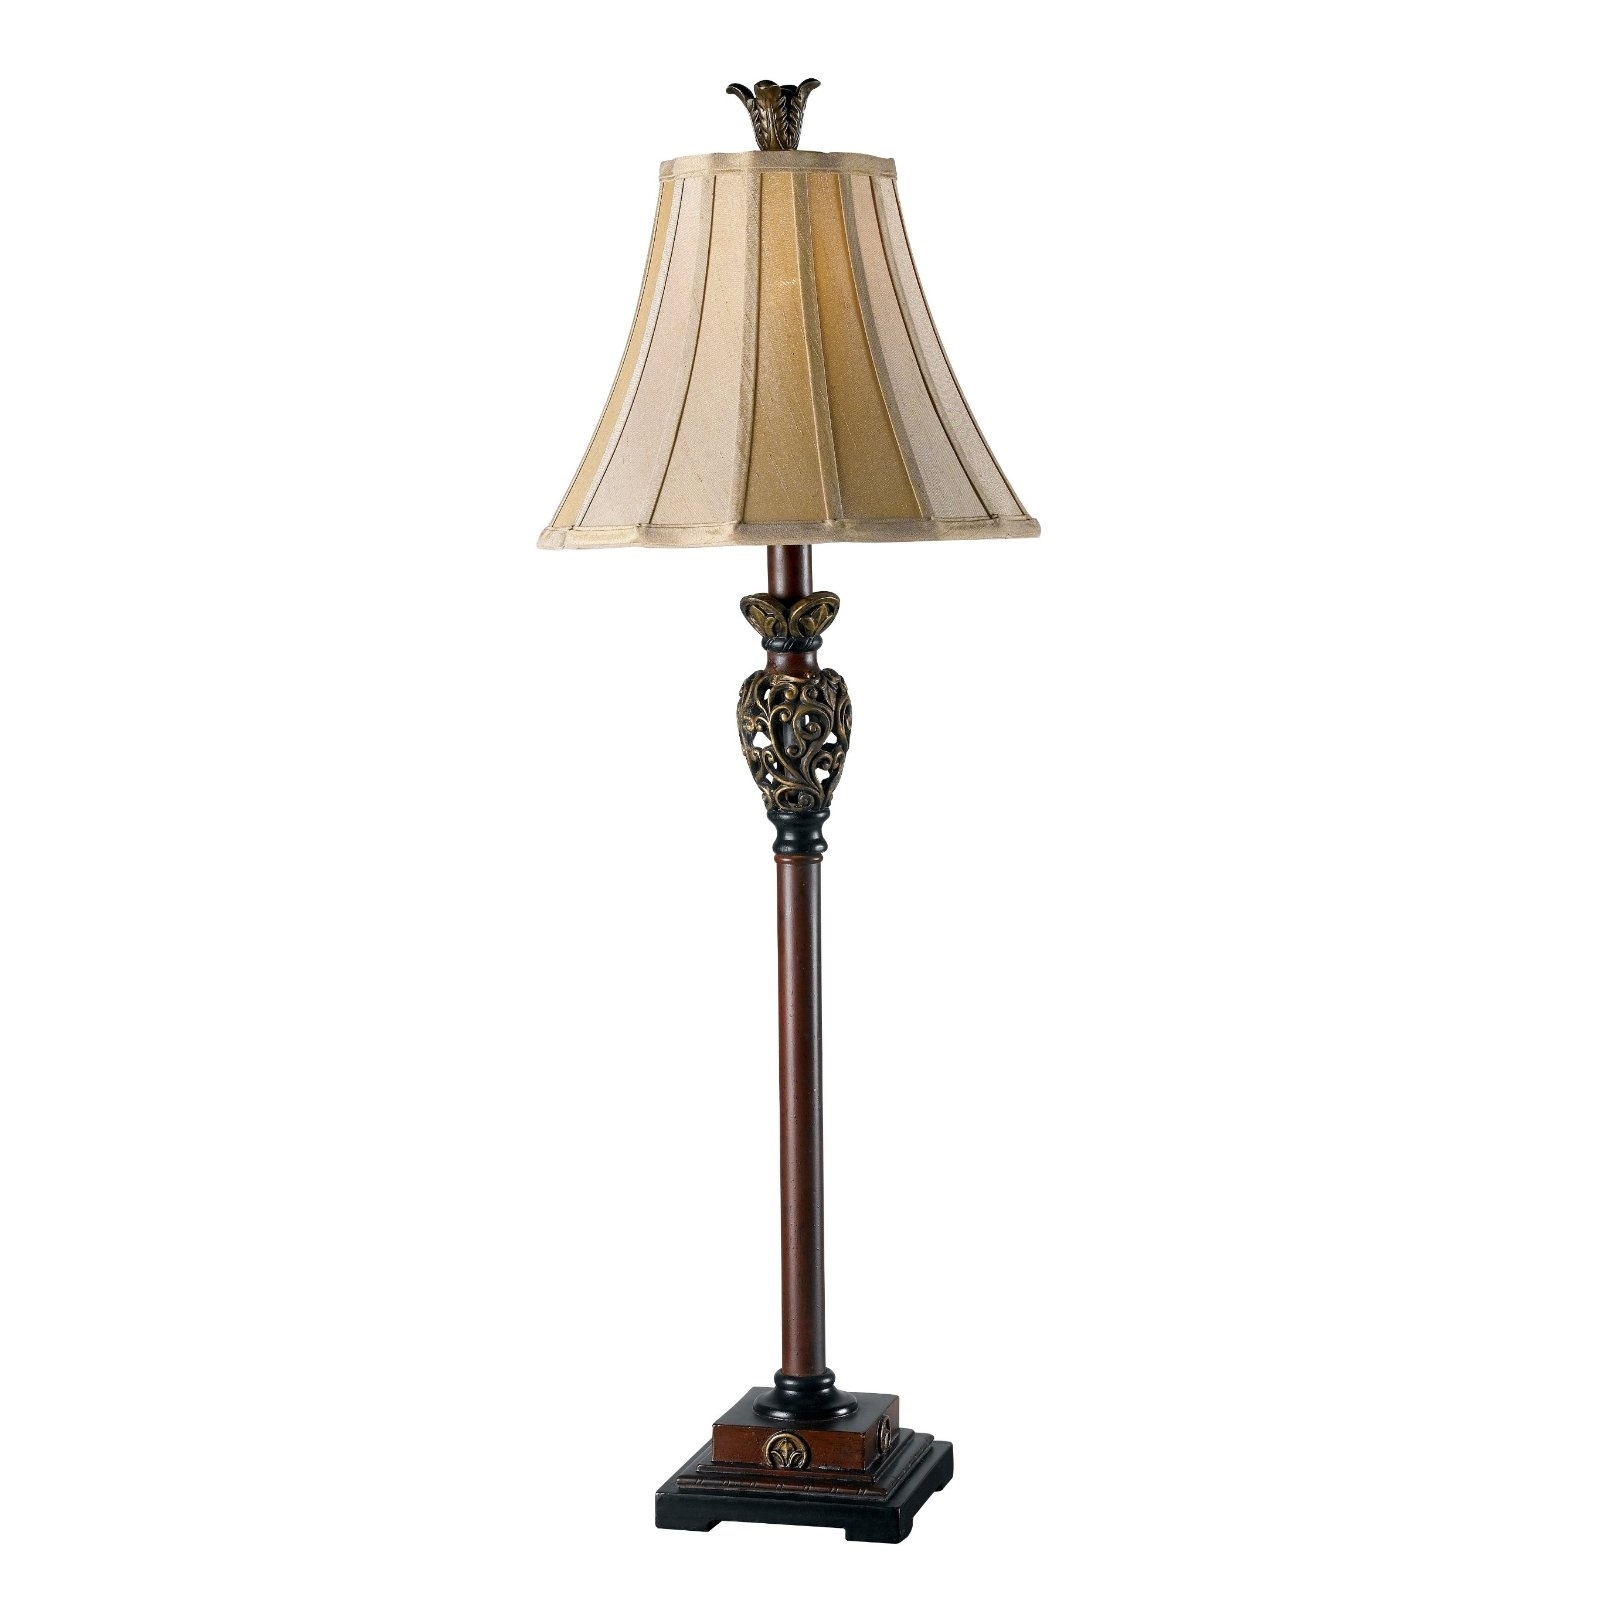 Kenroy Home Iron Lace Buffet Table Lamp, What Is A Buffet Table Lamp